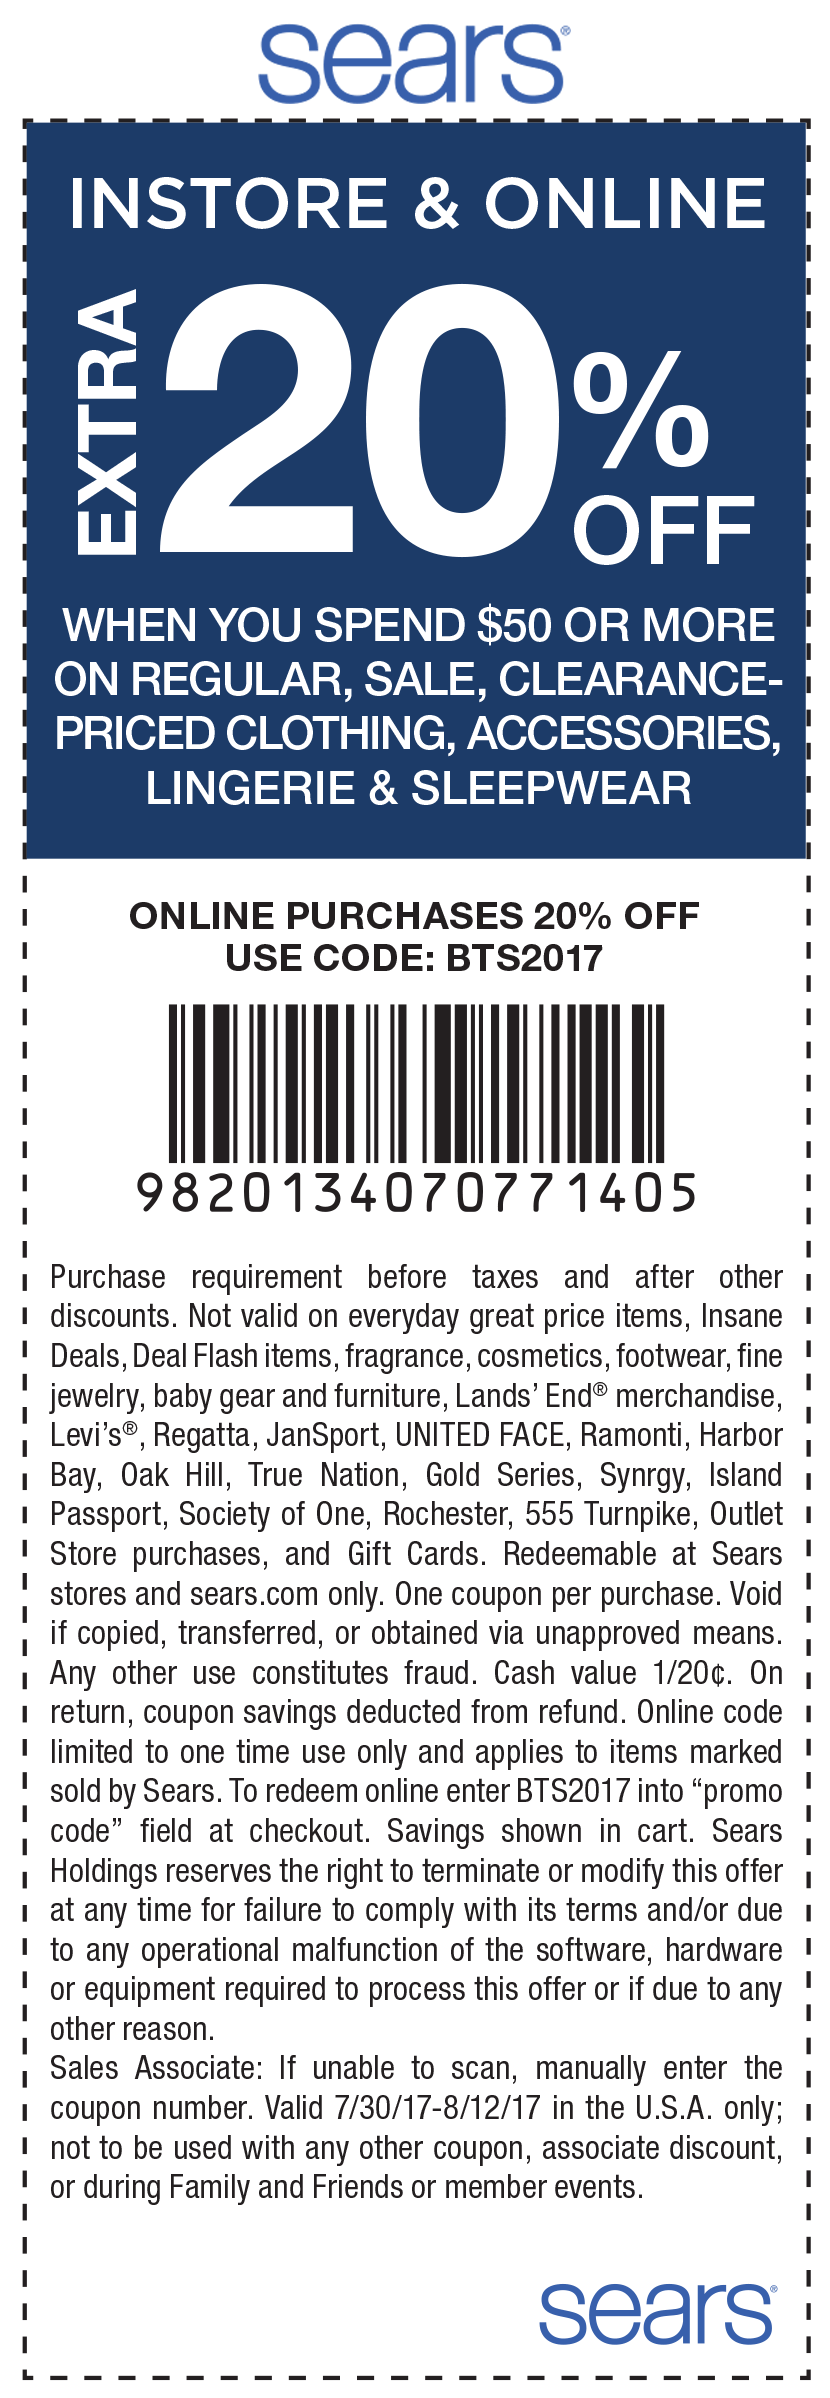 sears-july-2021-coupons-and-promo-codes